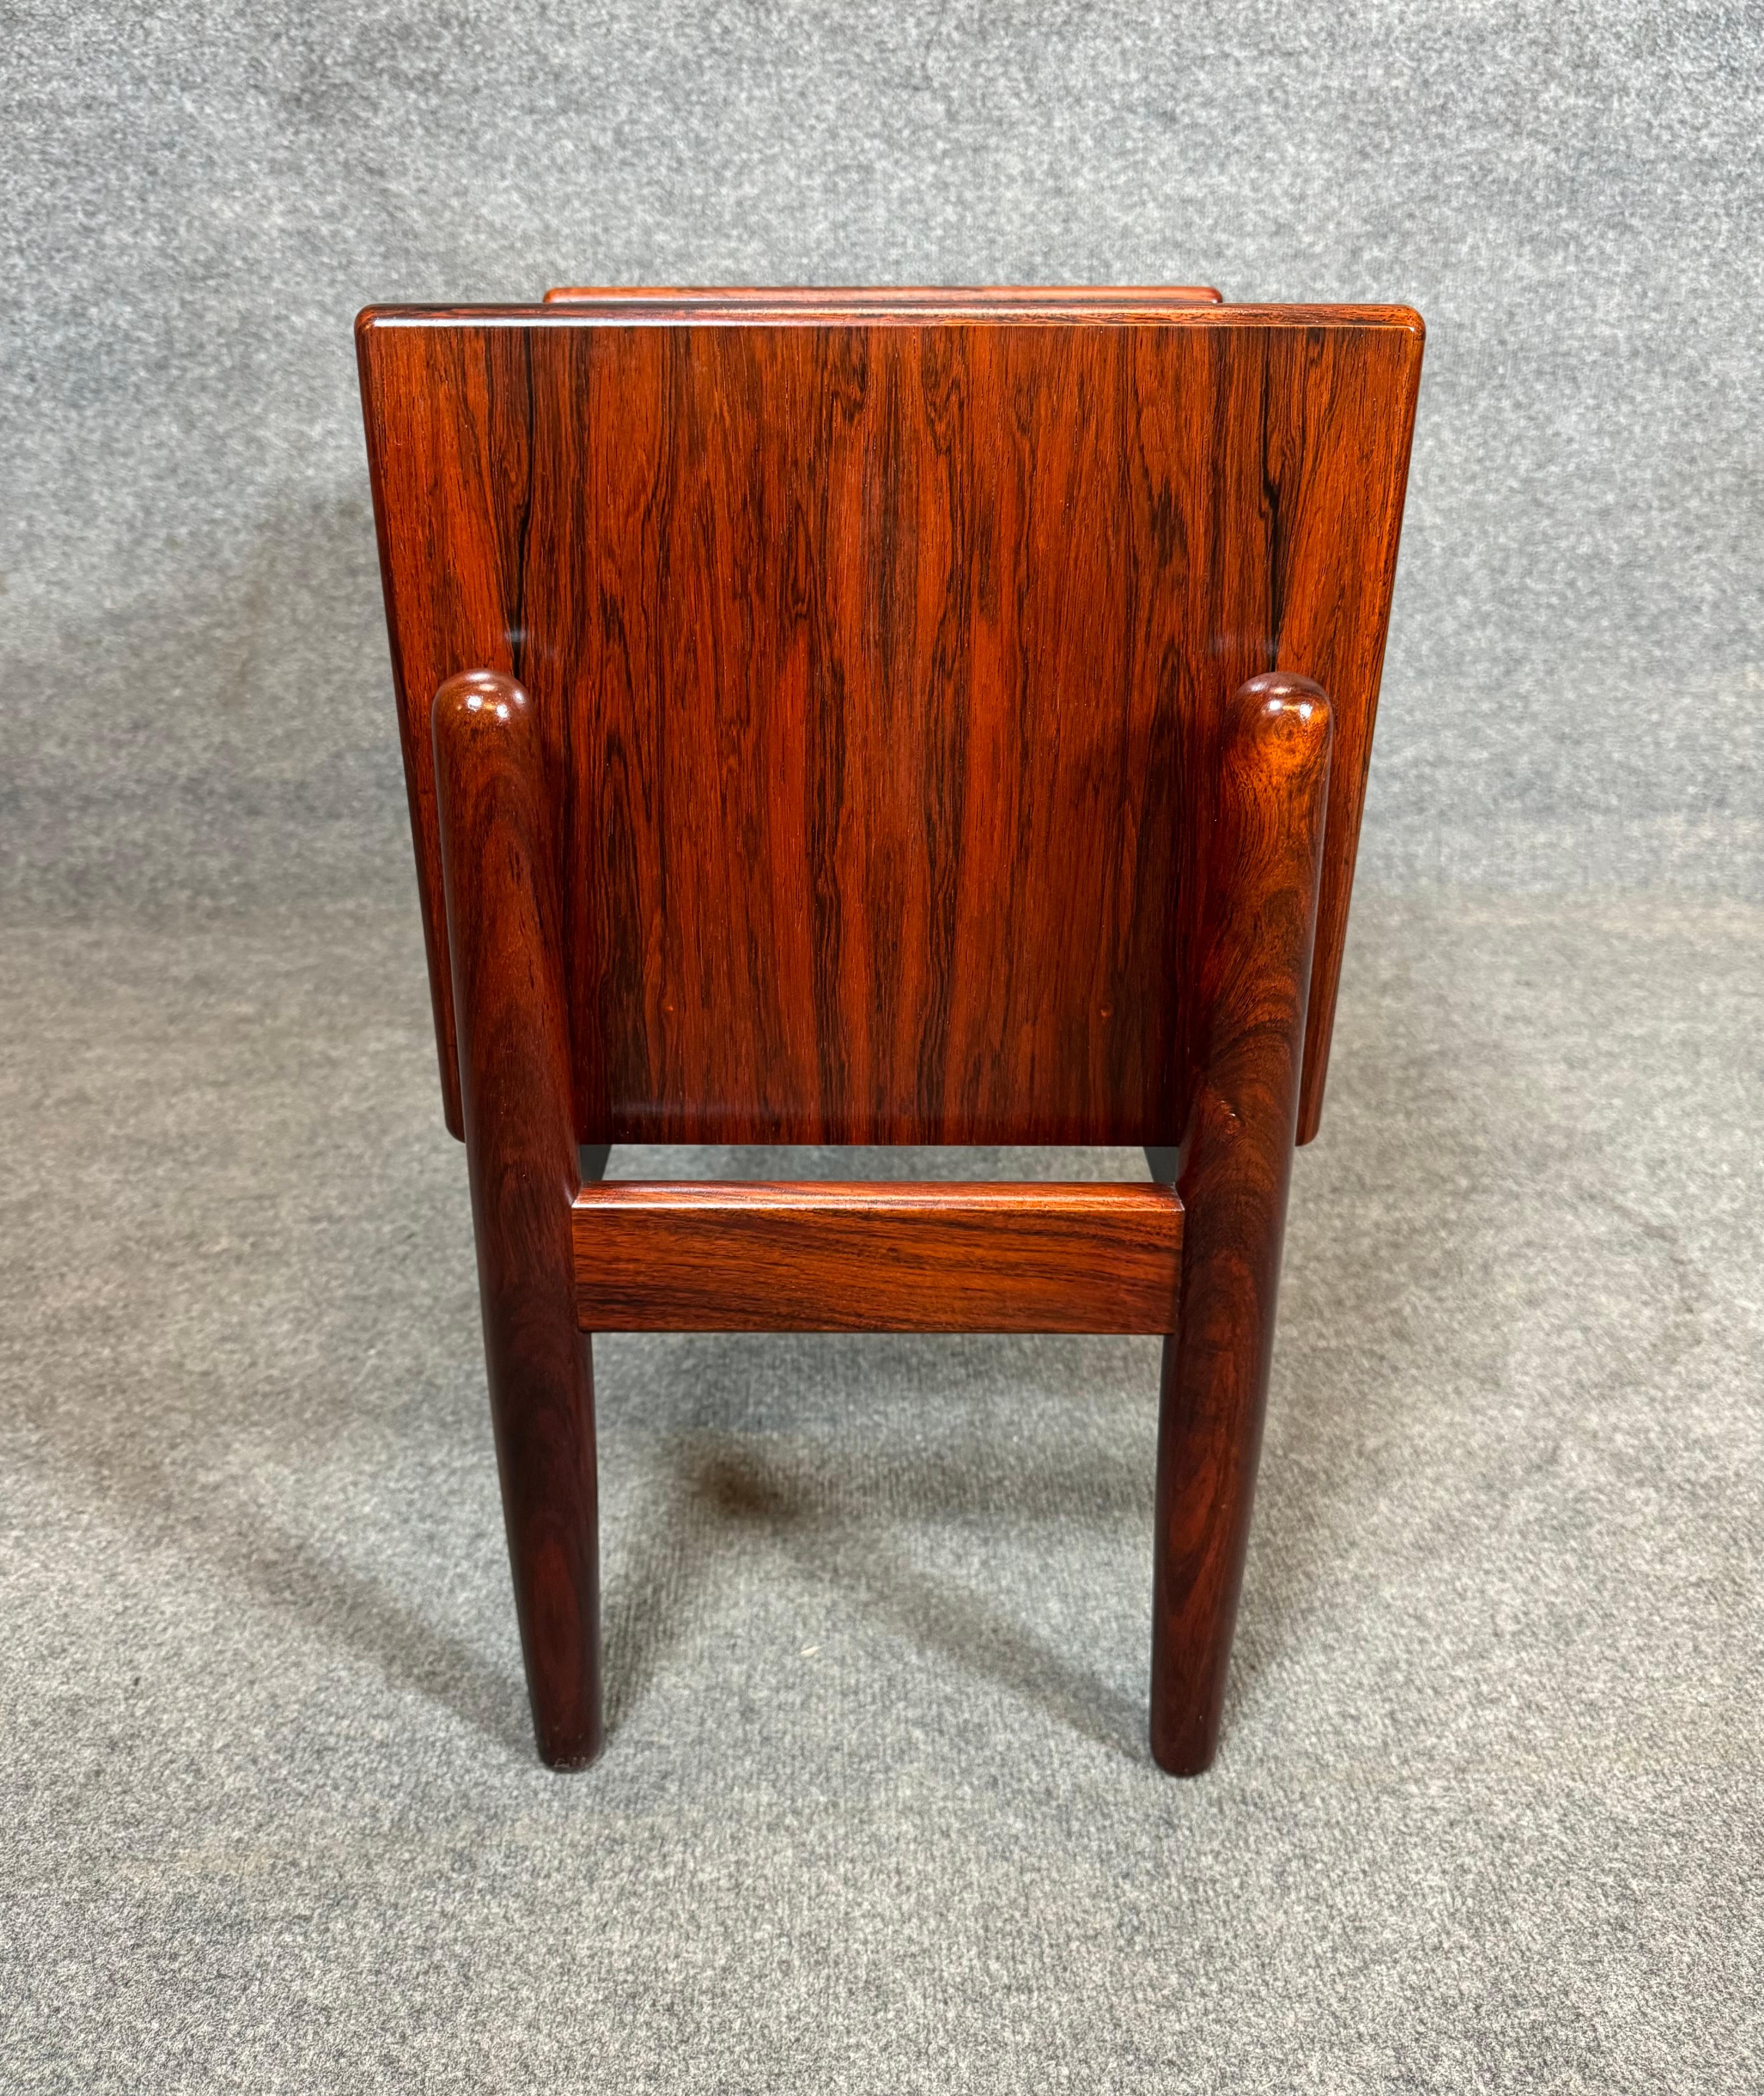 Woodwork Vintage Danish Mid Century Modern Rosewood Entry Chest Planter by Arne Wahl Iver For Sale